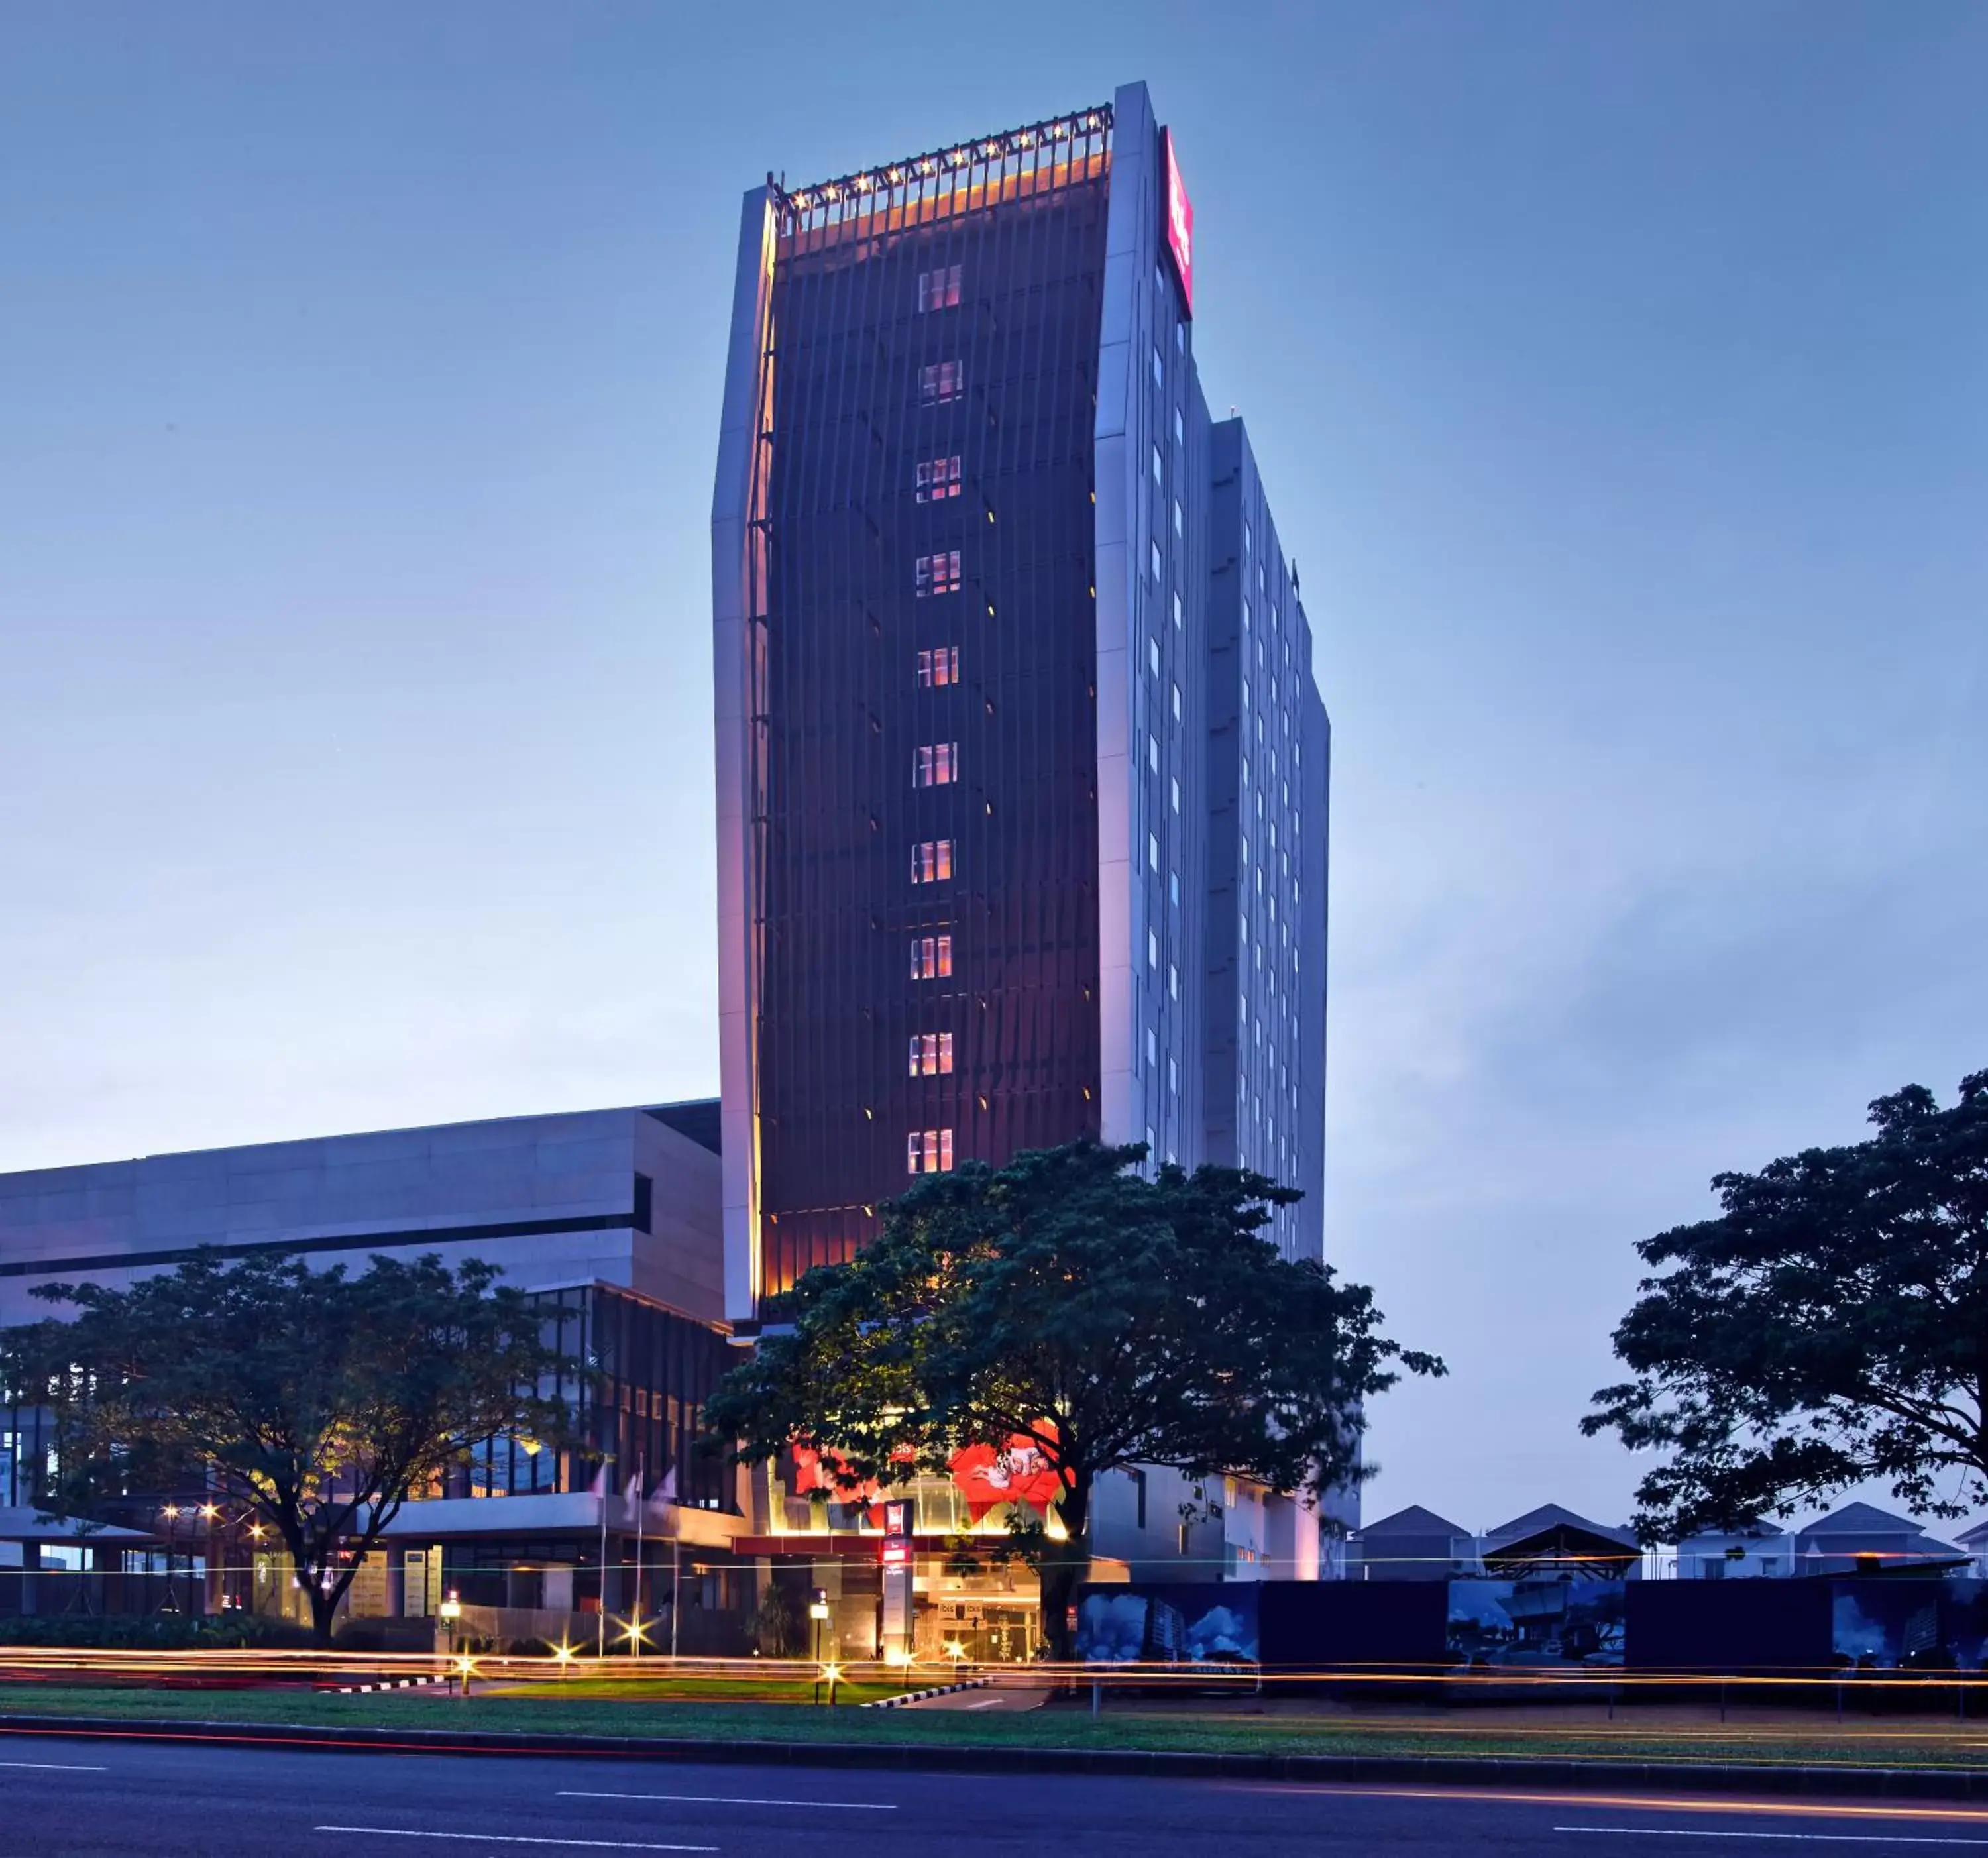 Property building in Ibis Gading Serpong